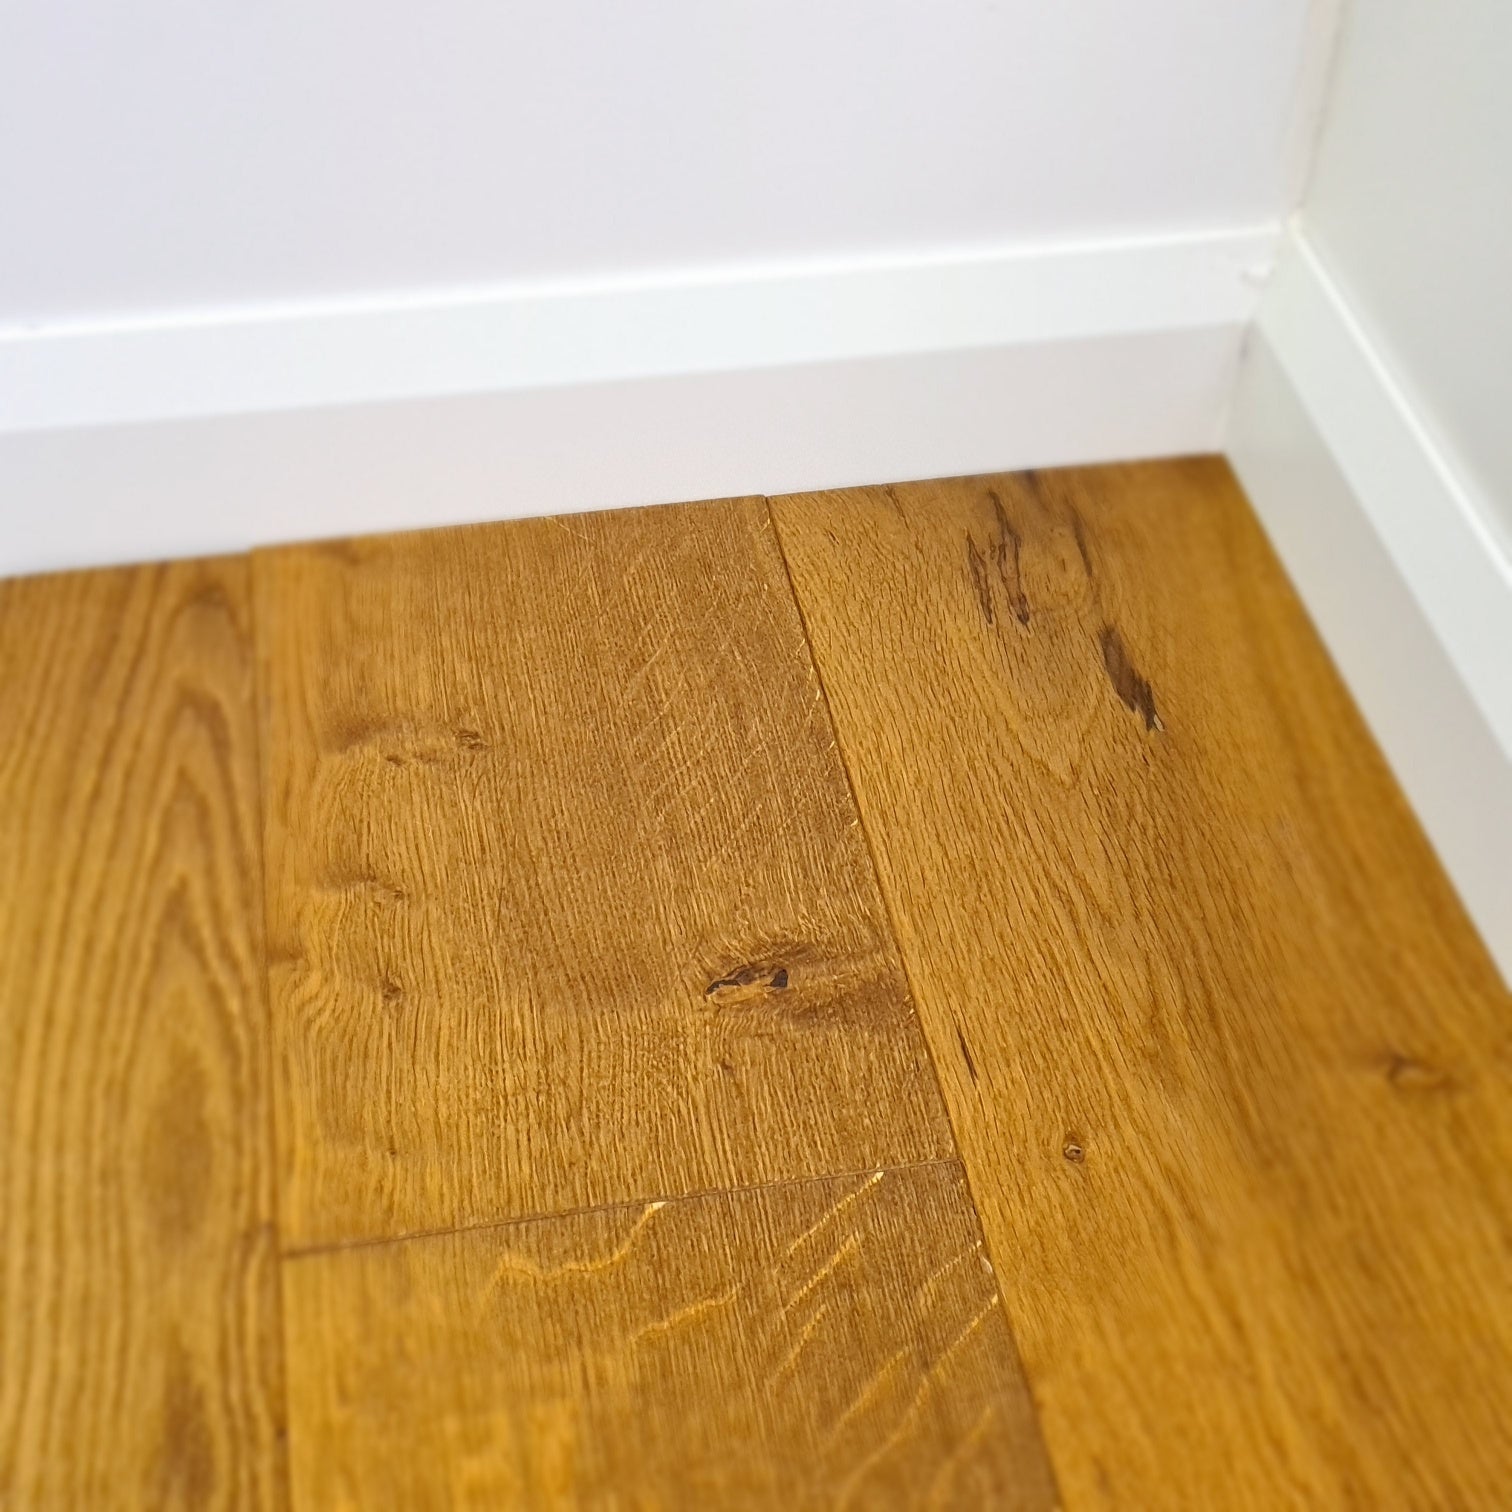 TimberFloor Smoked  Oak Brushed and Lacquered 15/4x190x1900mm Engineered Flooring £49.95m2